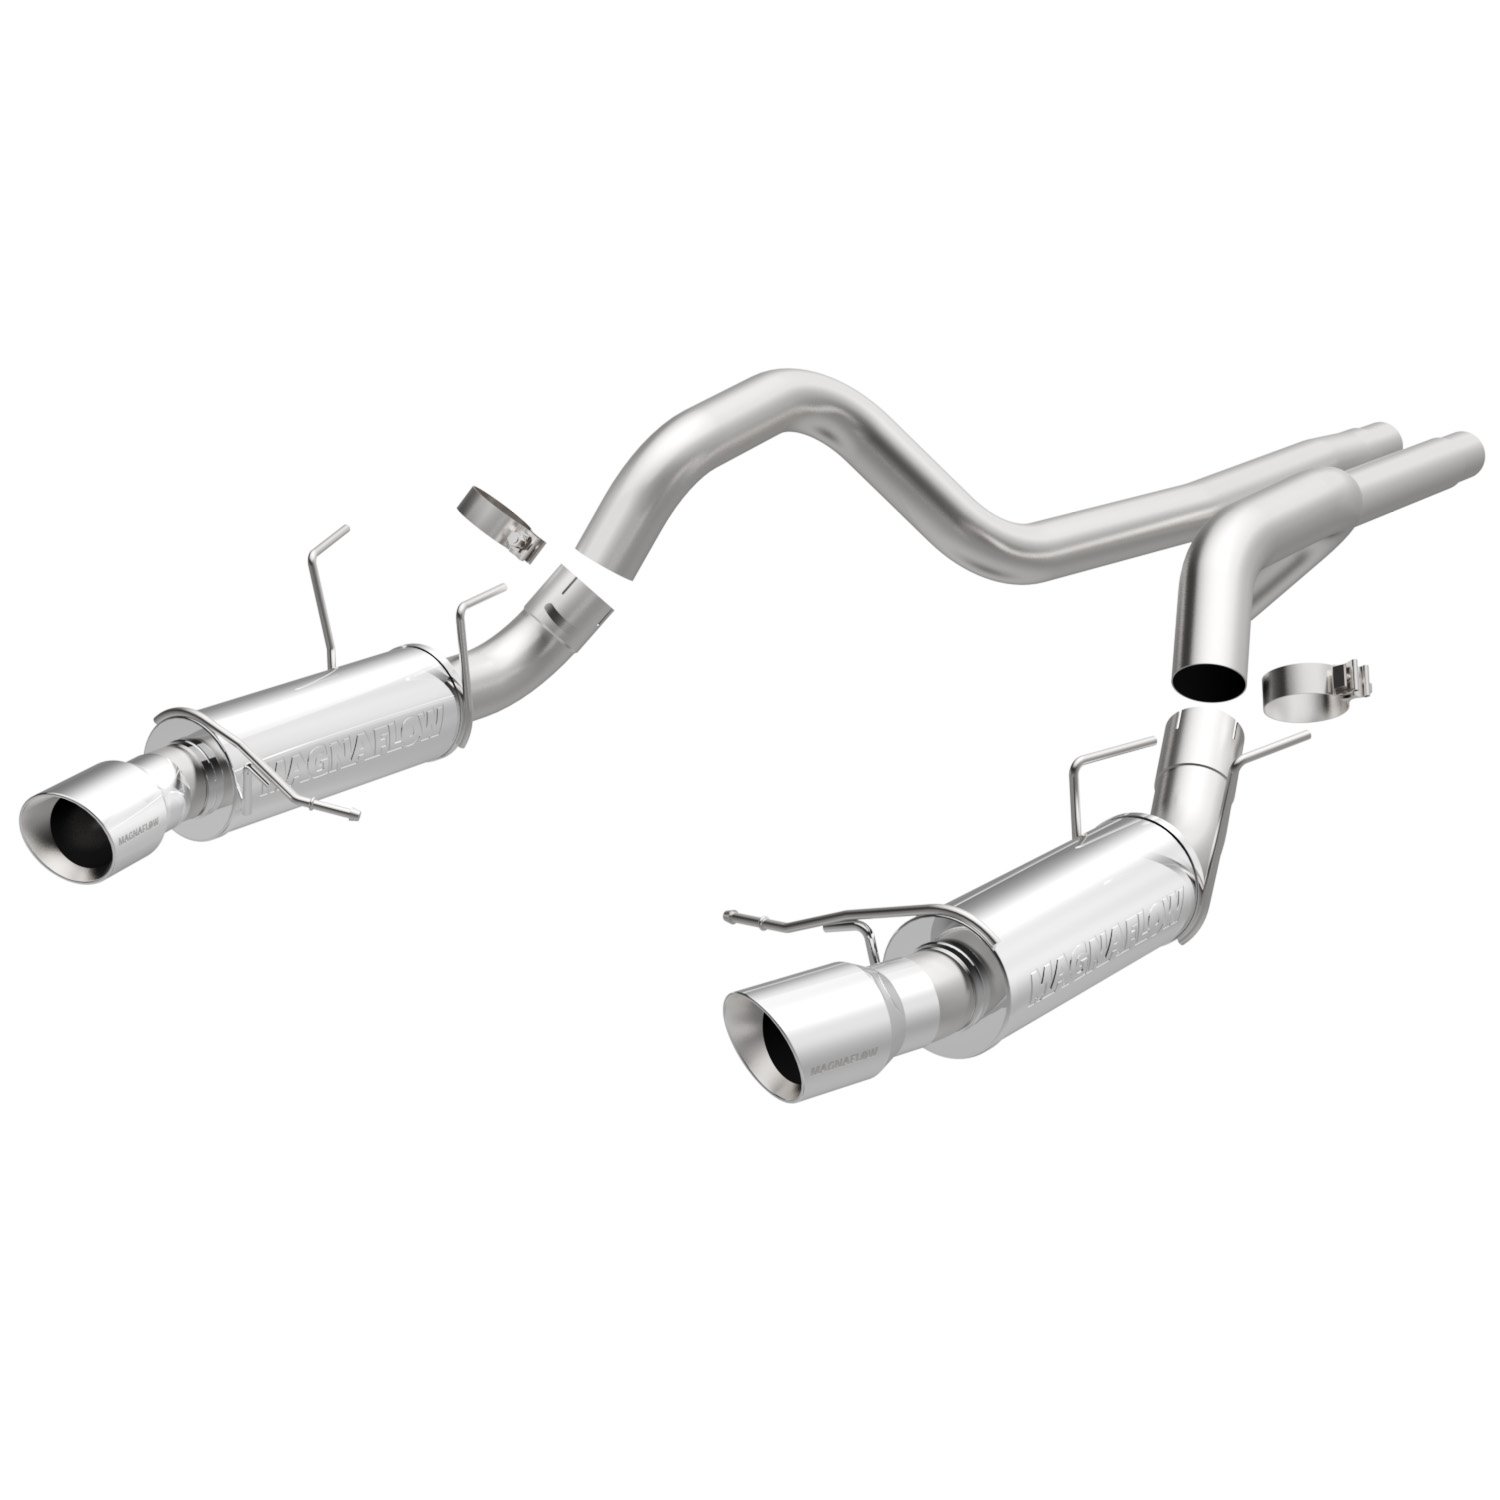 MagnaFlow Competition Diesel Exhaust System